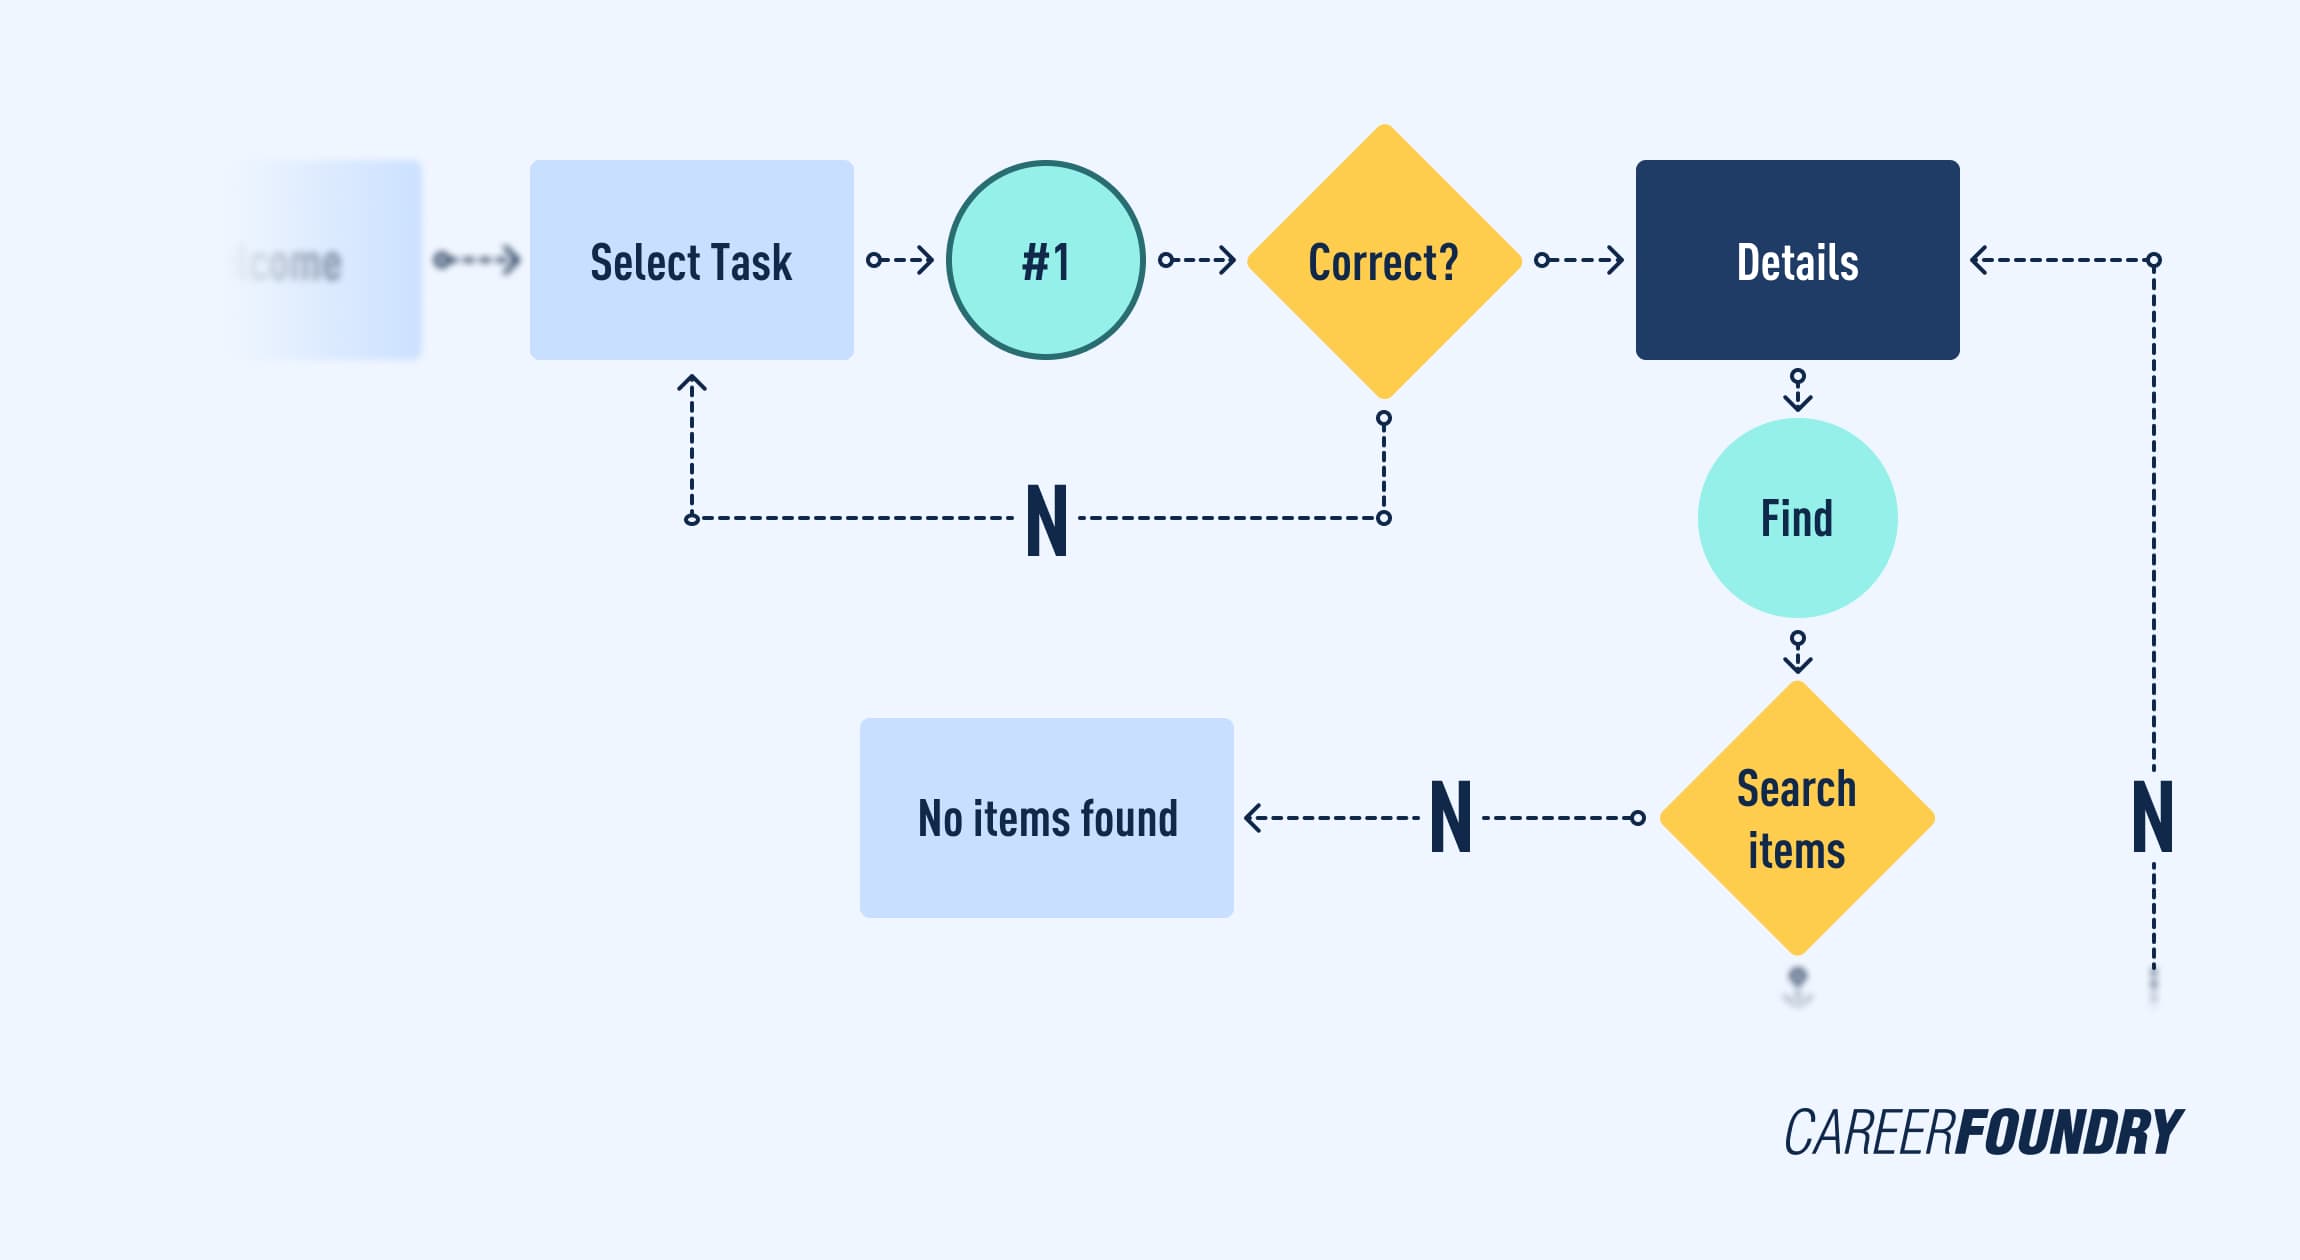 User flow diagram — what it is, why it's important, and how to